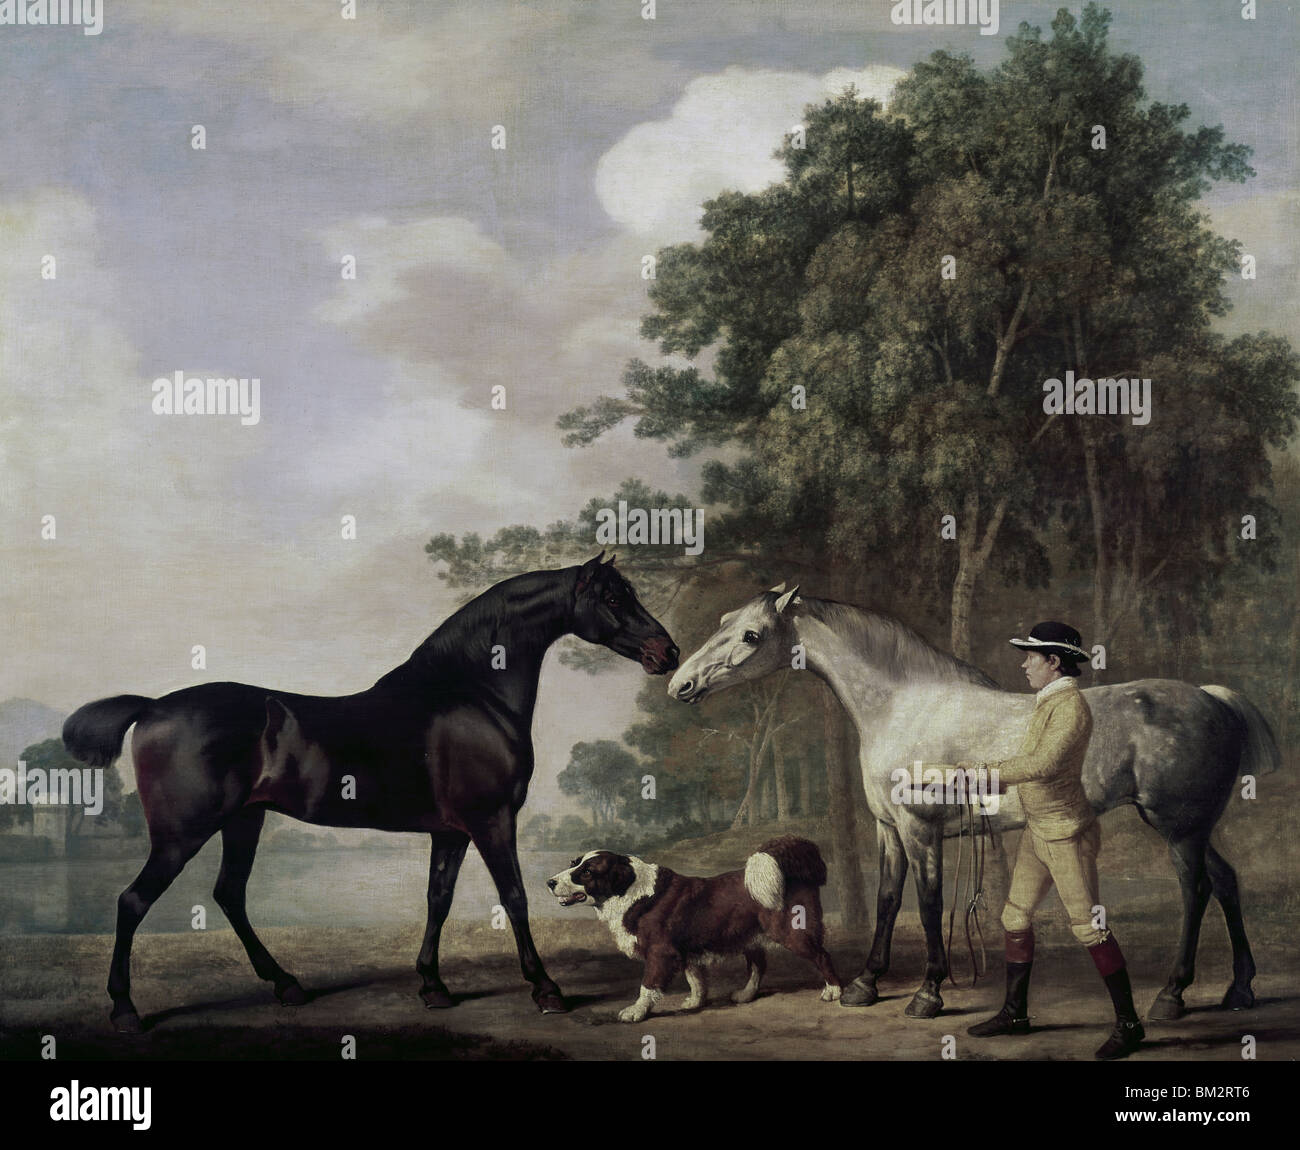 Boy with two horses nad dog, painted image Stock Photo